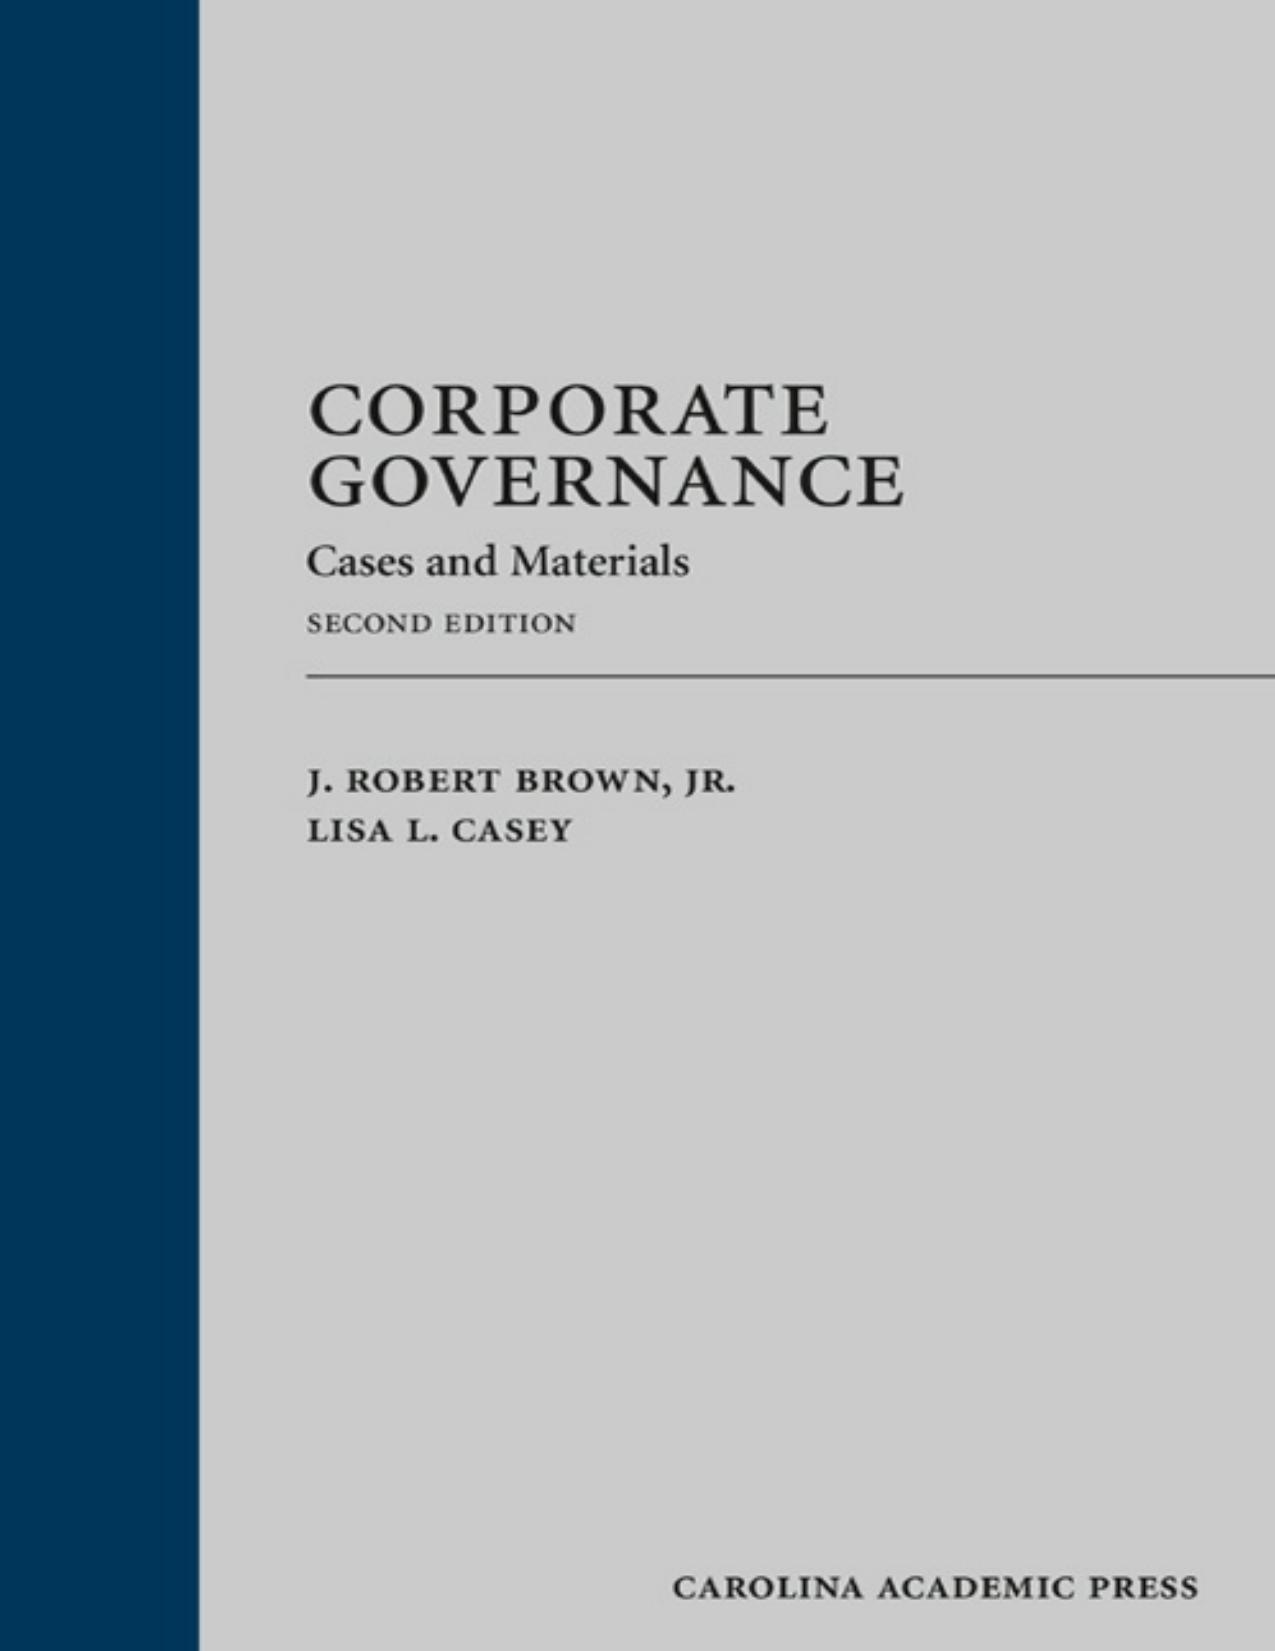 Corporate Governance_ Cases and Materials, 2nd Second Edition - Brown, J. Robert, Jr. & Lisa L. Casey.jpg